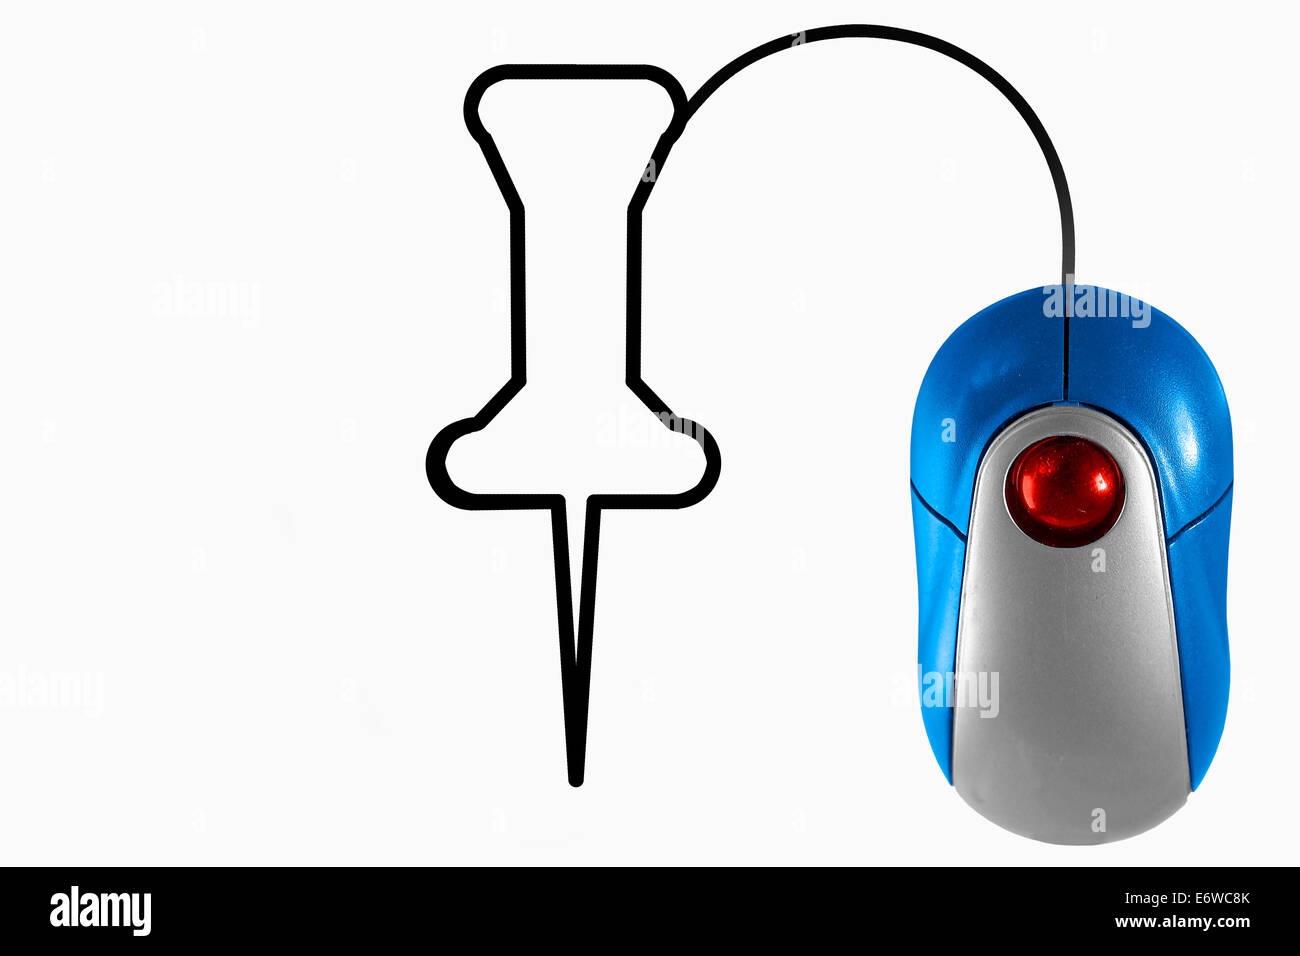 Pushpin depicted by computer mouse cable Stock Photo